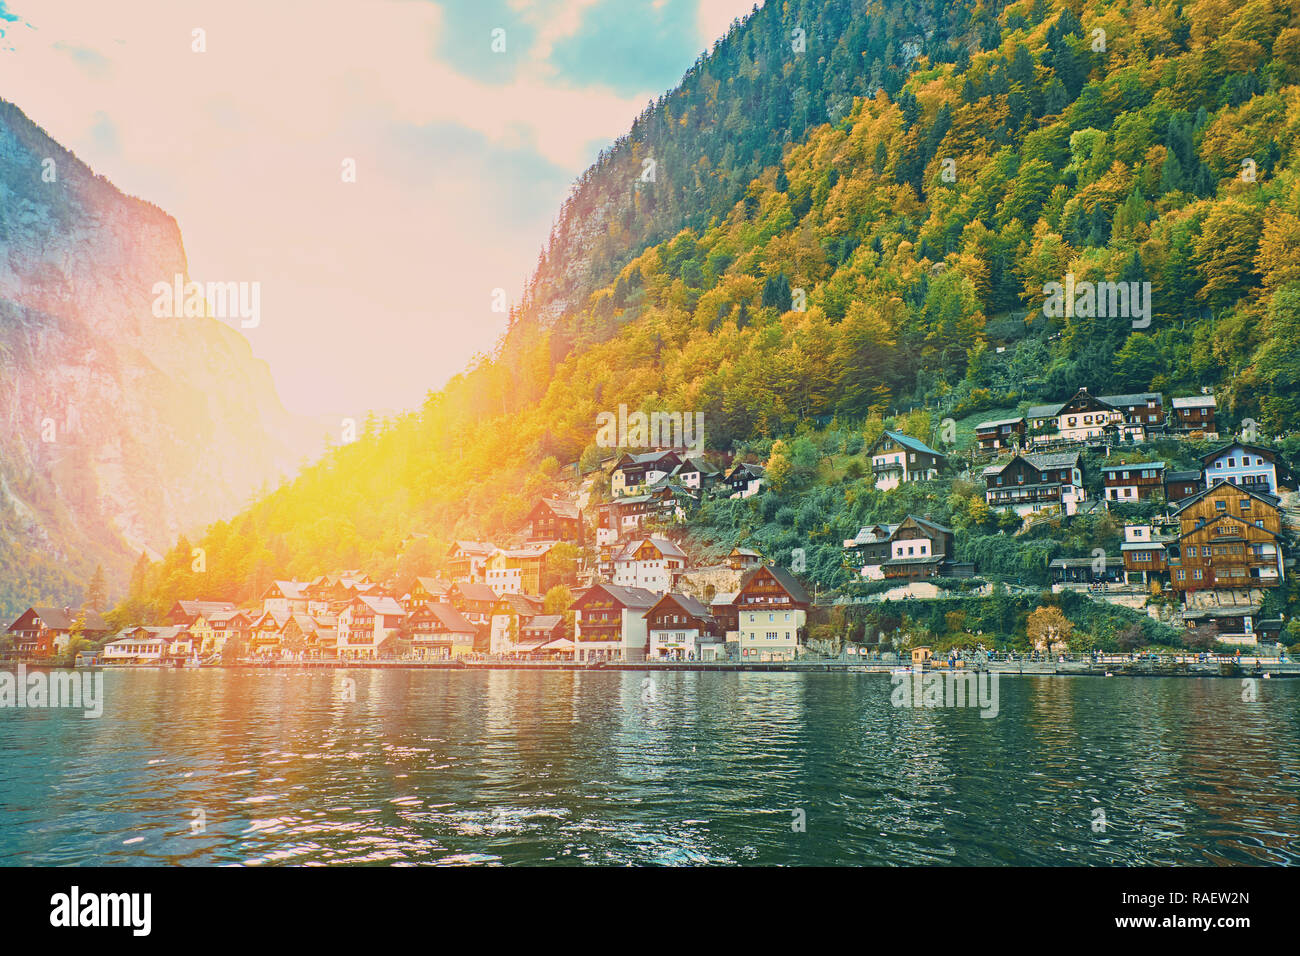 Sunset over Hallstatt austrian alps resort and mountain village with traditional rural alps houses, restaurants, hotels and wooden boat houses at Hall Stock Photo